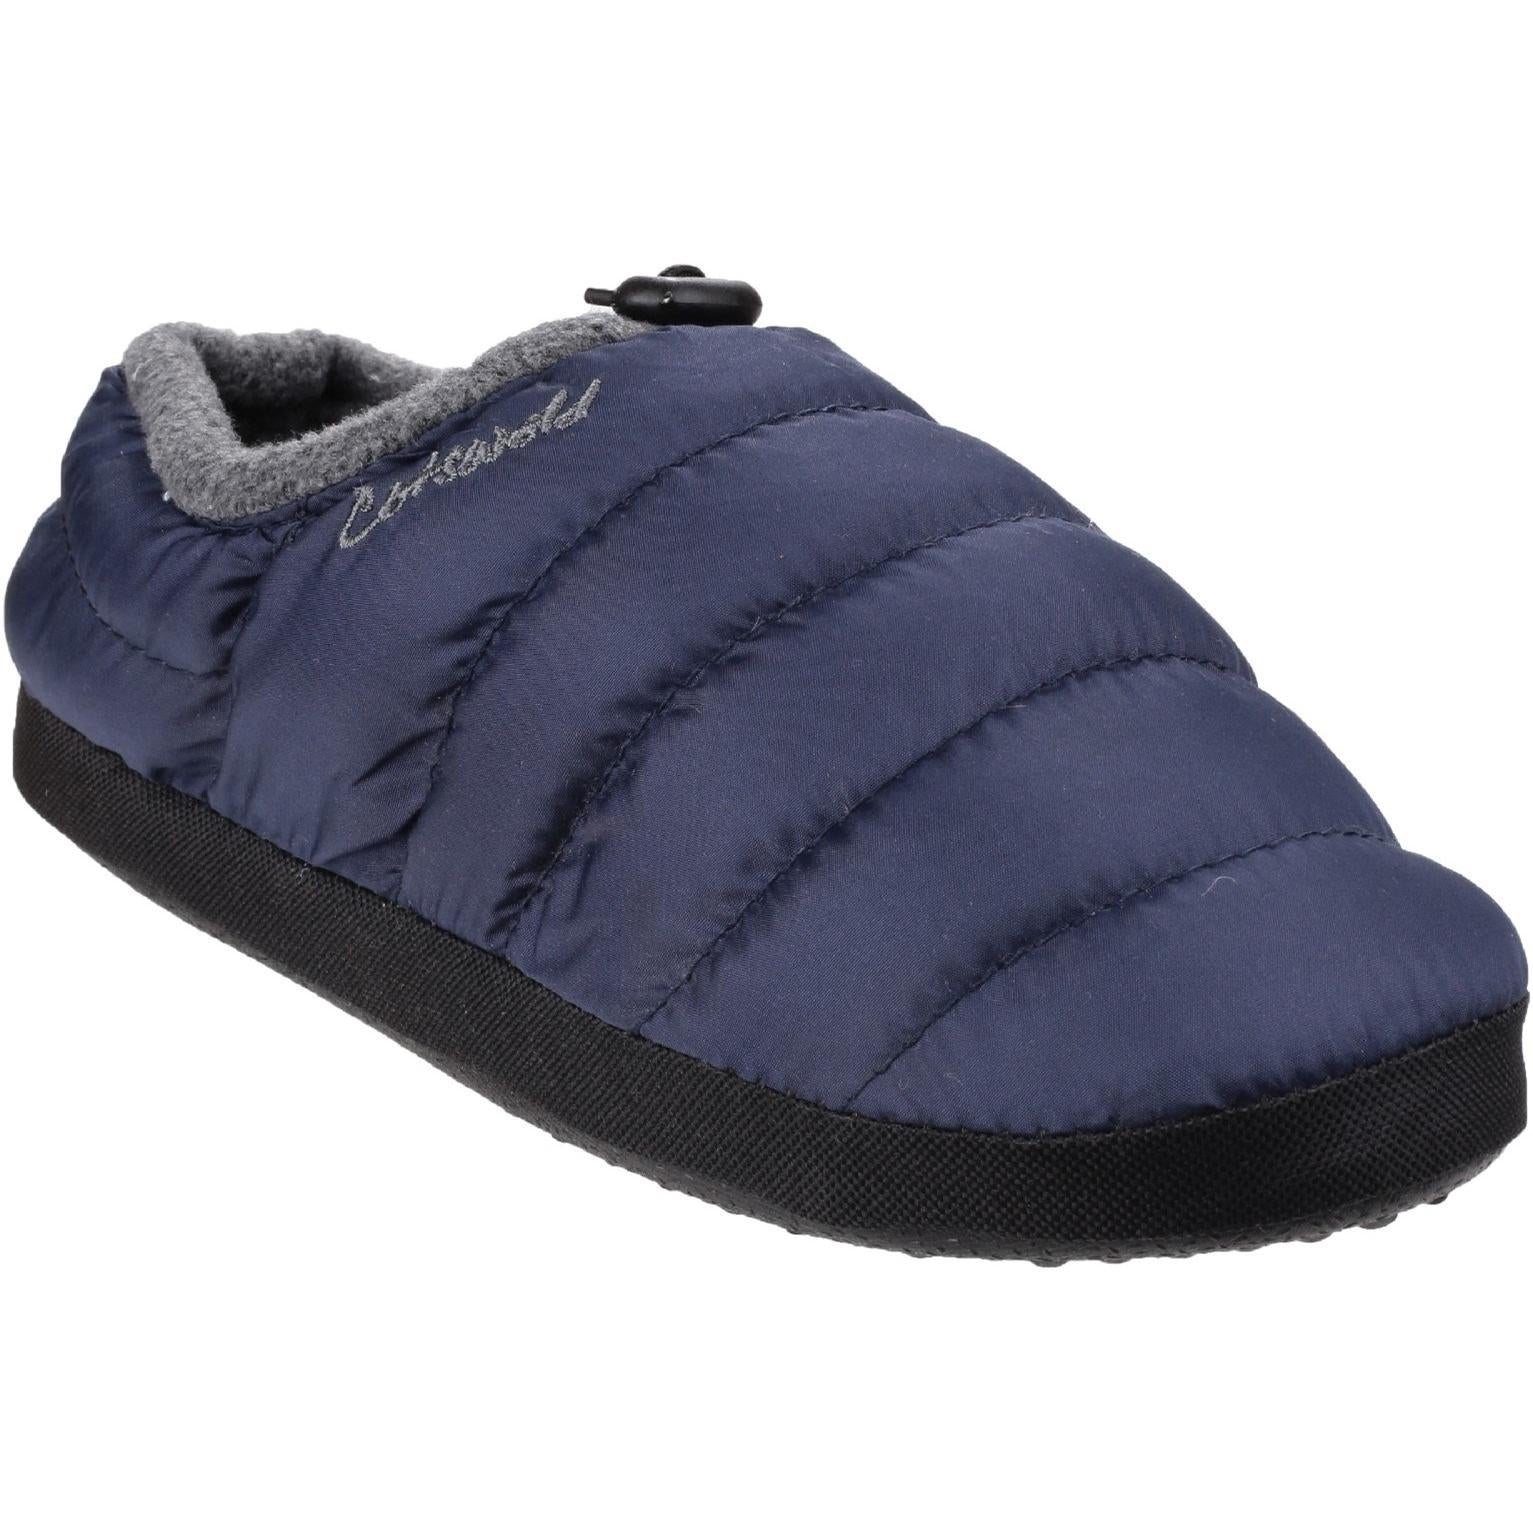 Cotswold Camping Slipper Jnr